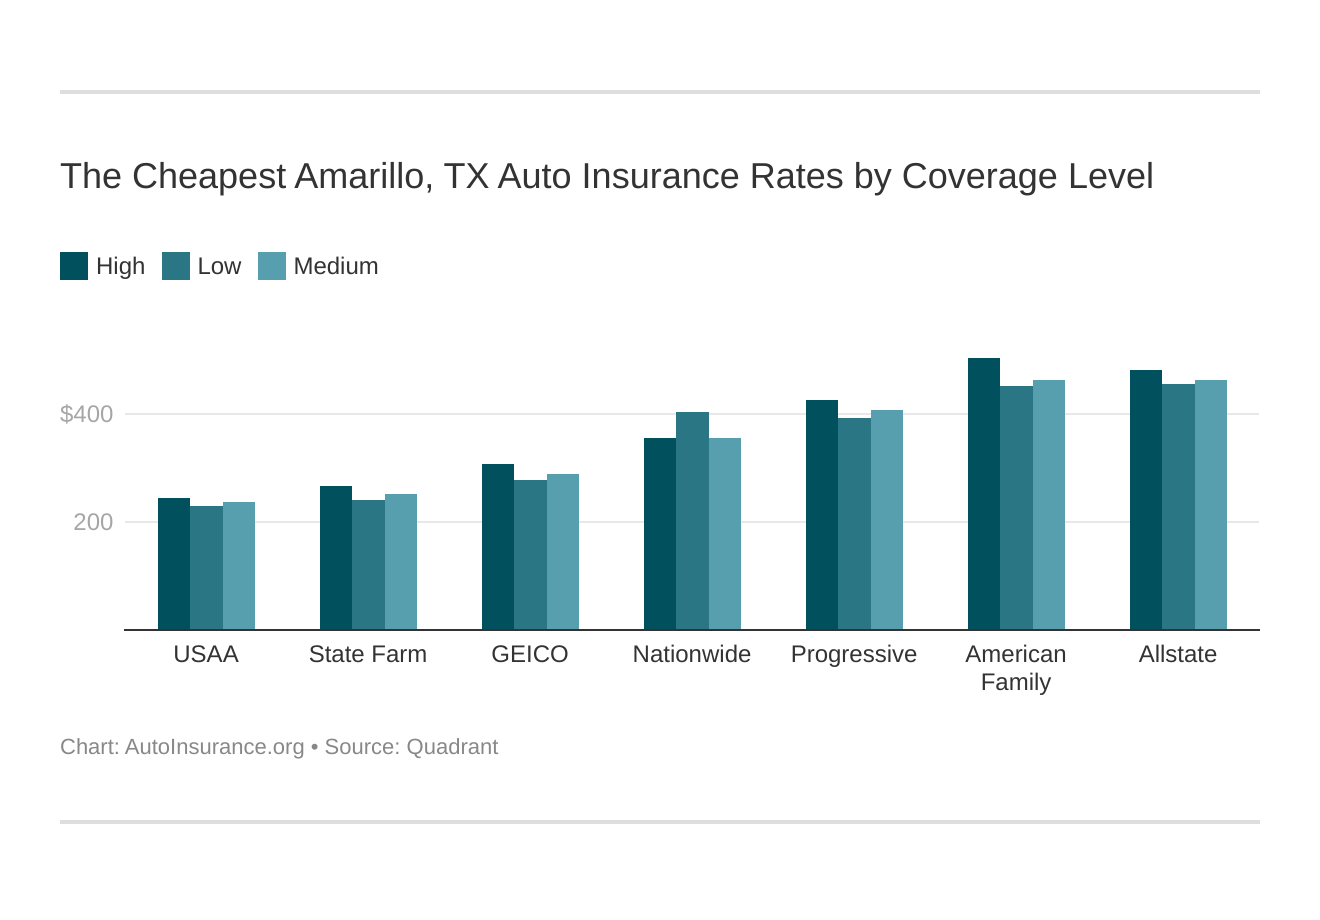 The Cheapest Amarillo, TX Auto Insurance Rates by Coverage Level